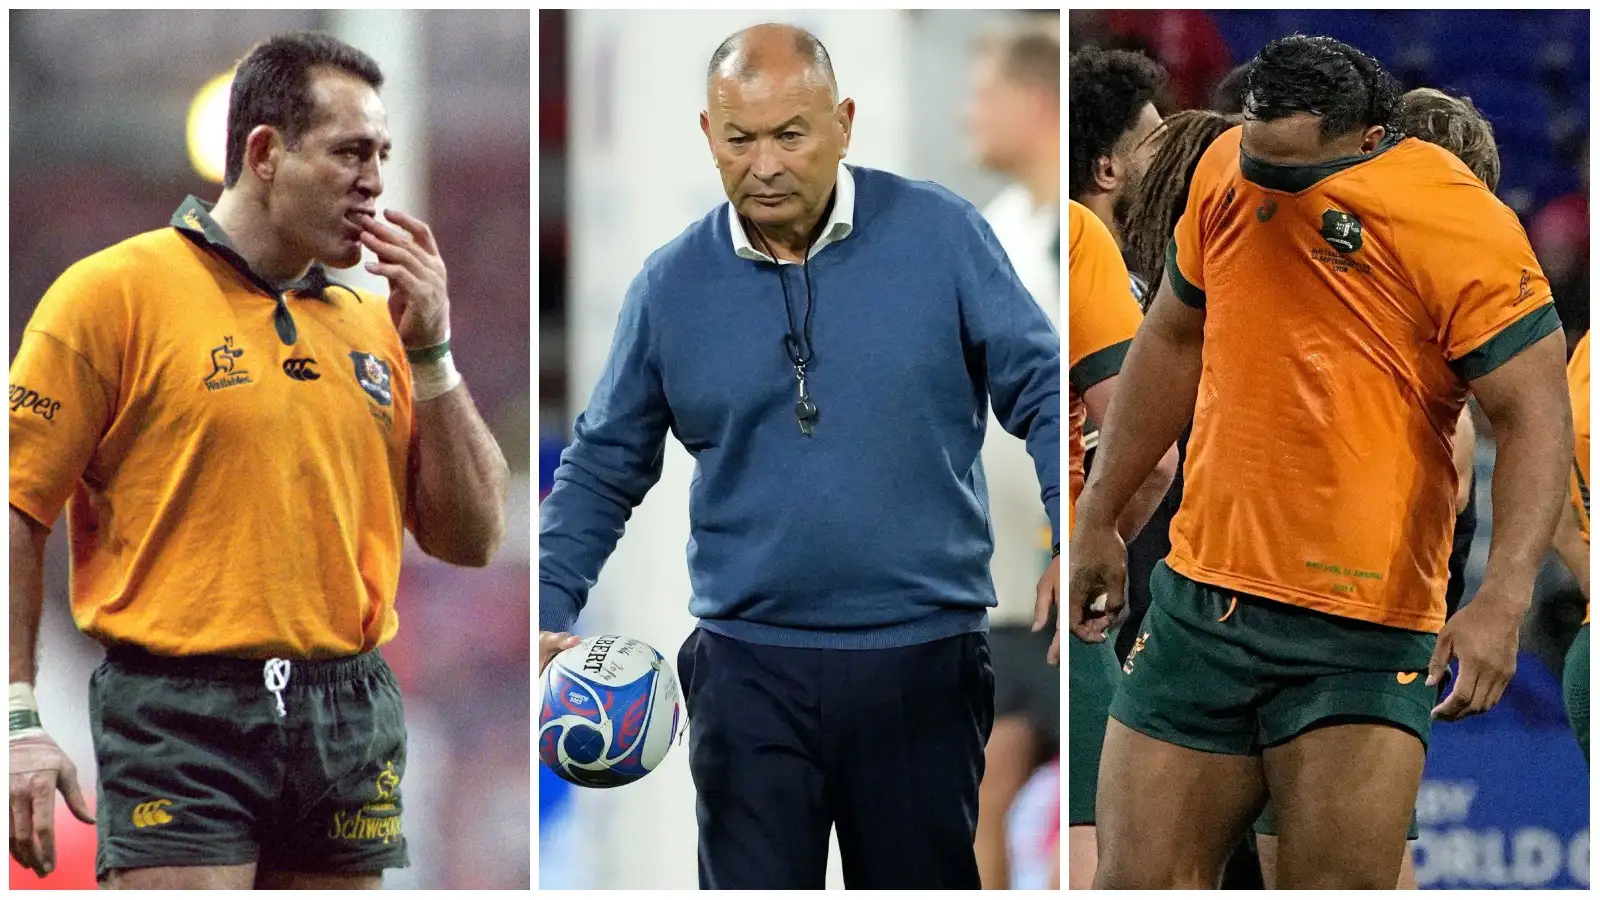 Wallabies legend David Campese on Australia's Rugby World Cup loss to Wales.